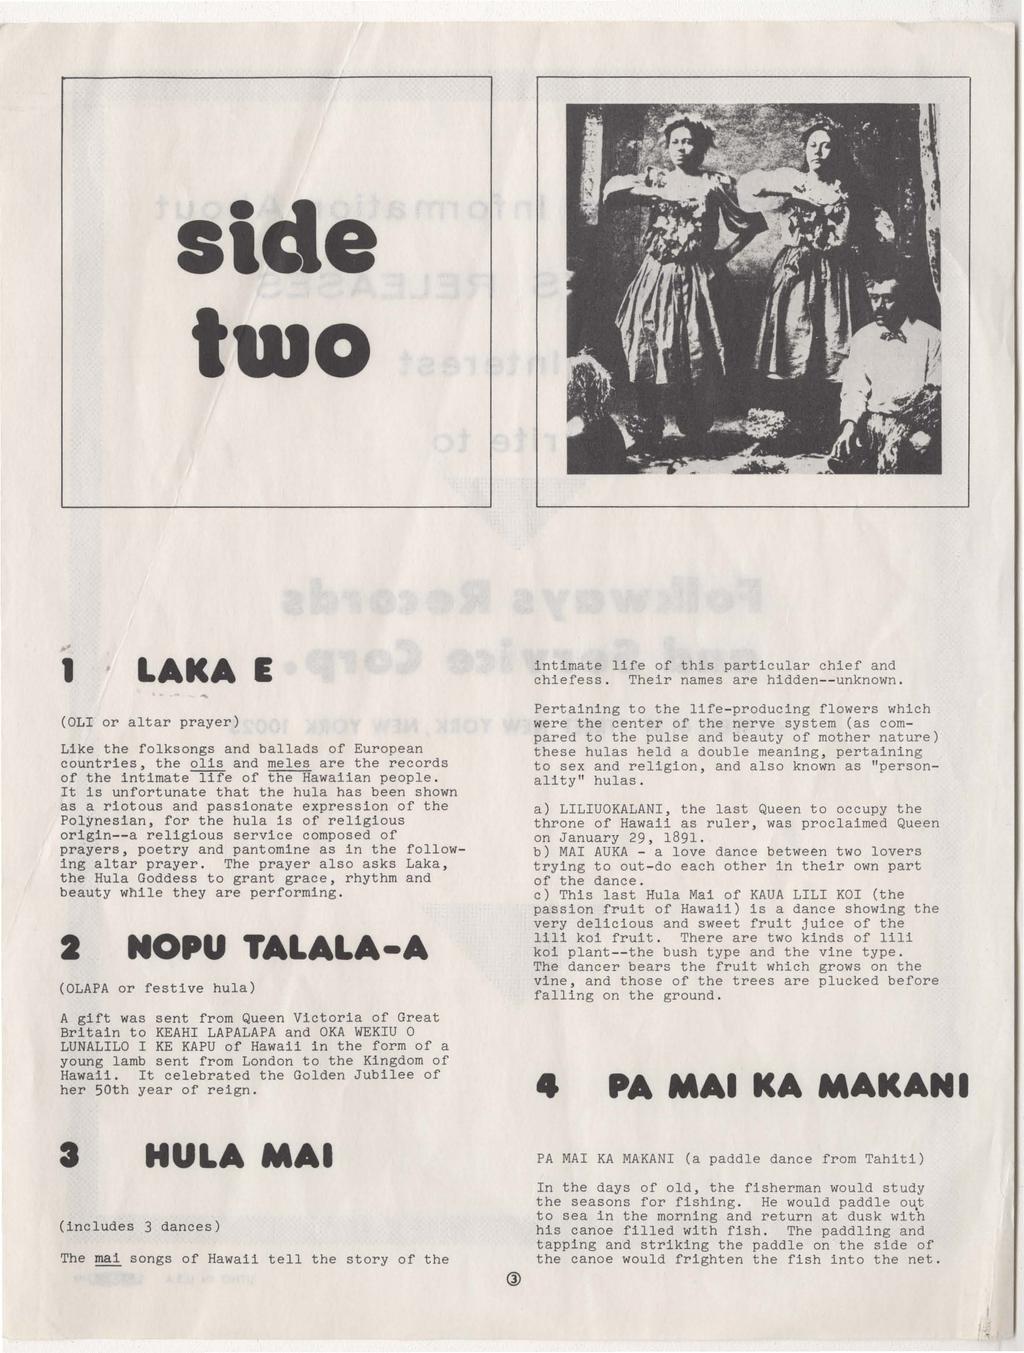 side two 1 LAKA E (OL or altar prayer) Like the folksongs and ballads of European countries, the olis and meles are the records of the intimate life of the Hawaiian people.